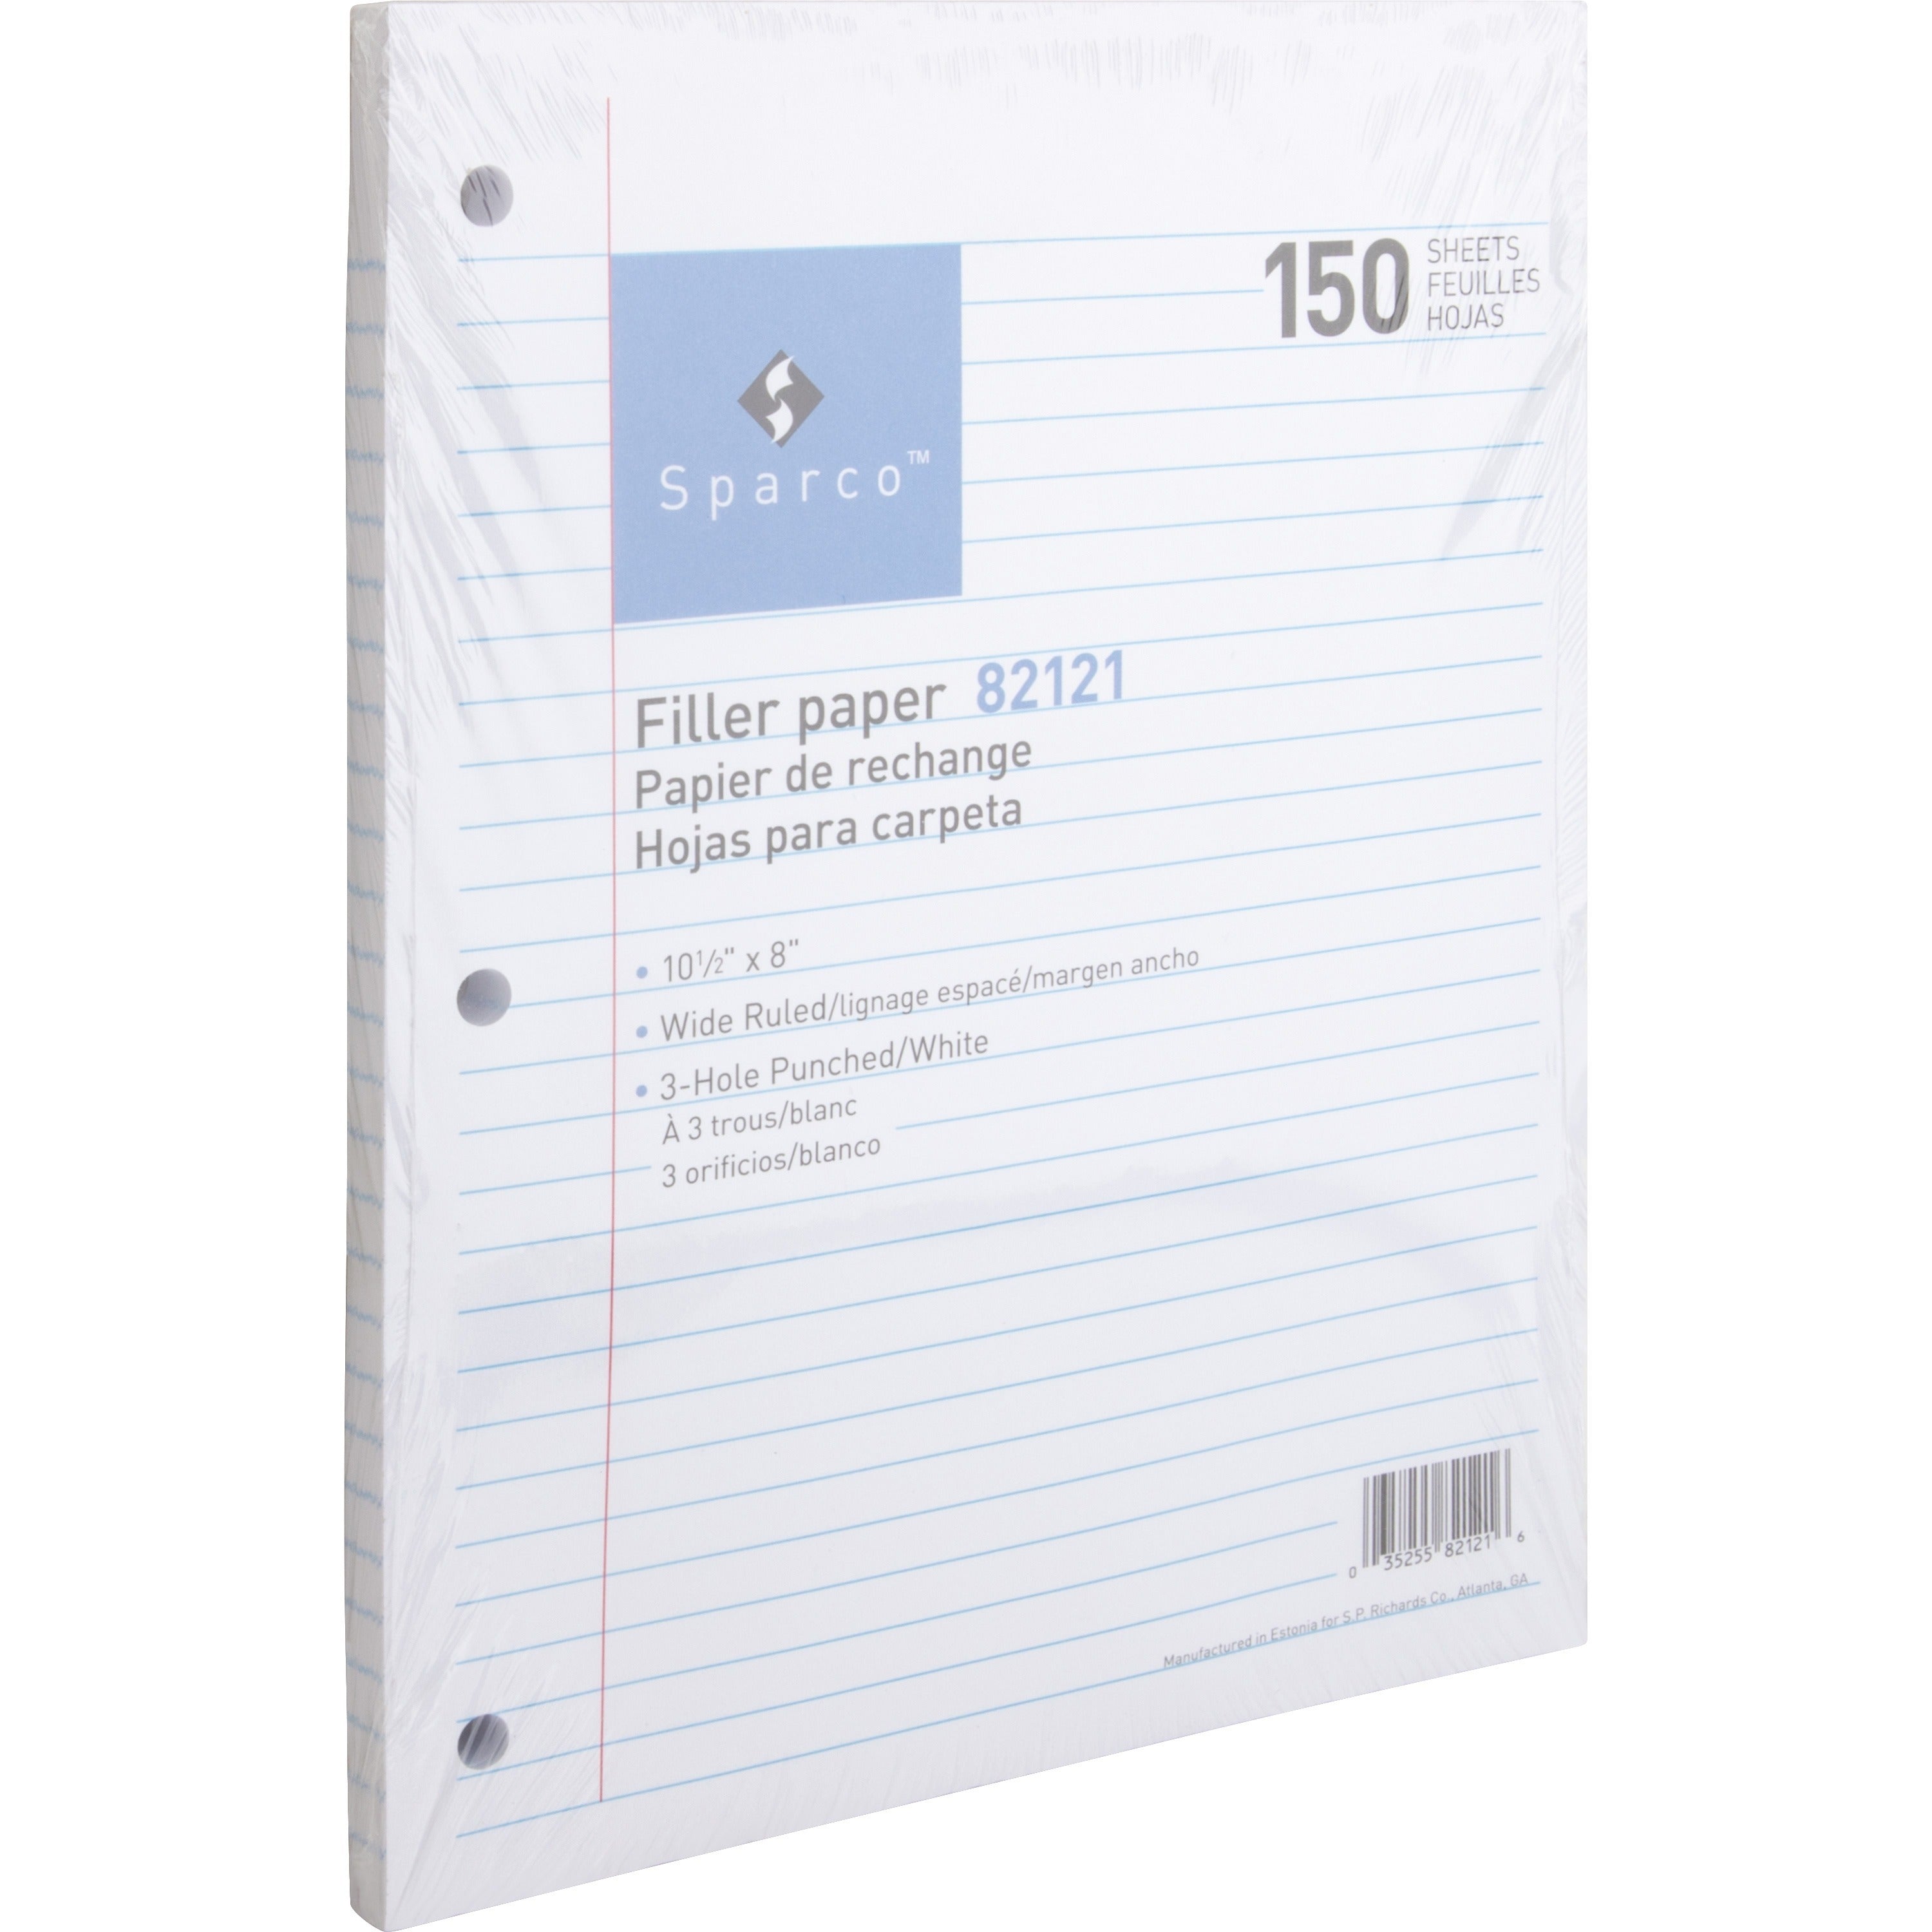 Sparco 3HP Filler Paper - 150 Sheets - Wide Ruled - 16 lb Basis Weight - 8" x 10 1/2" - White Paper - Bleed-free - 150 / Pack - 